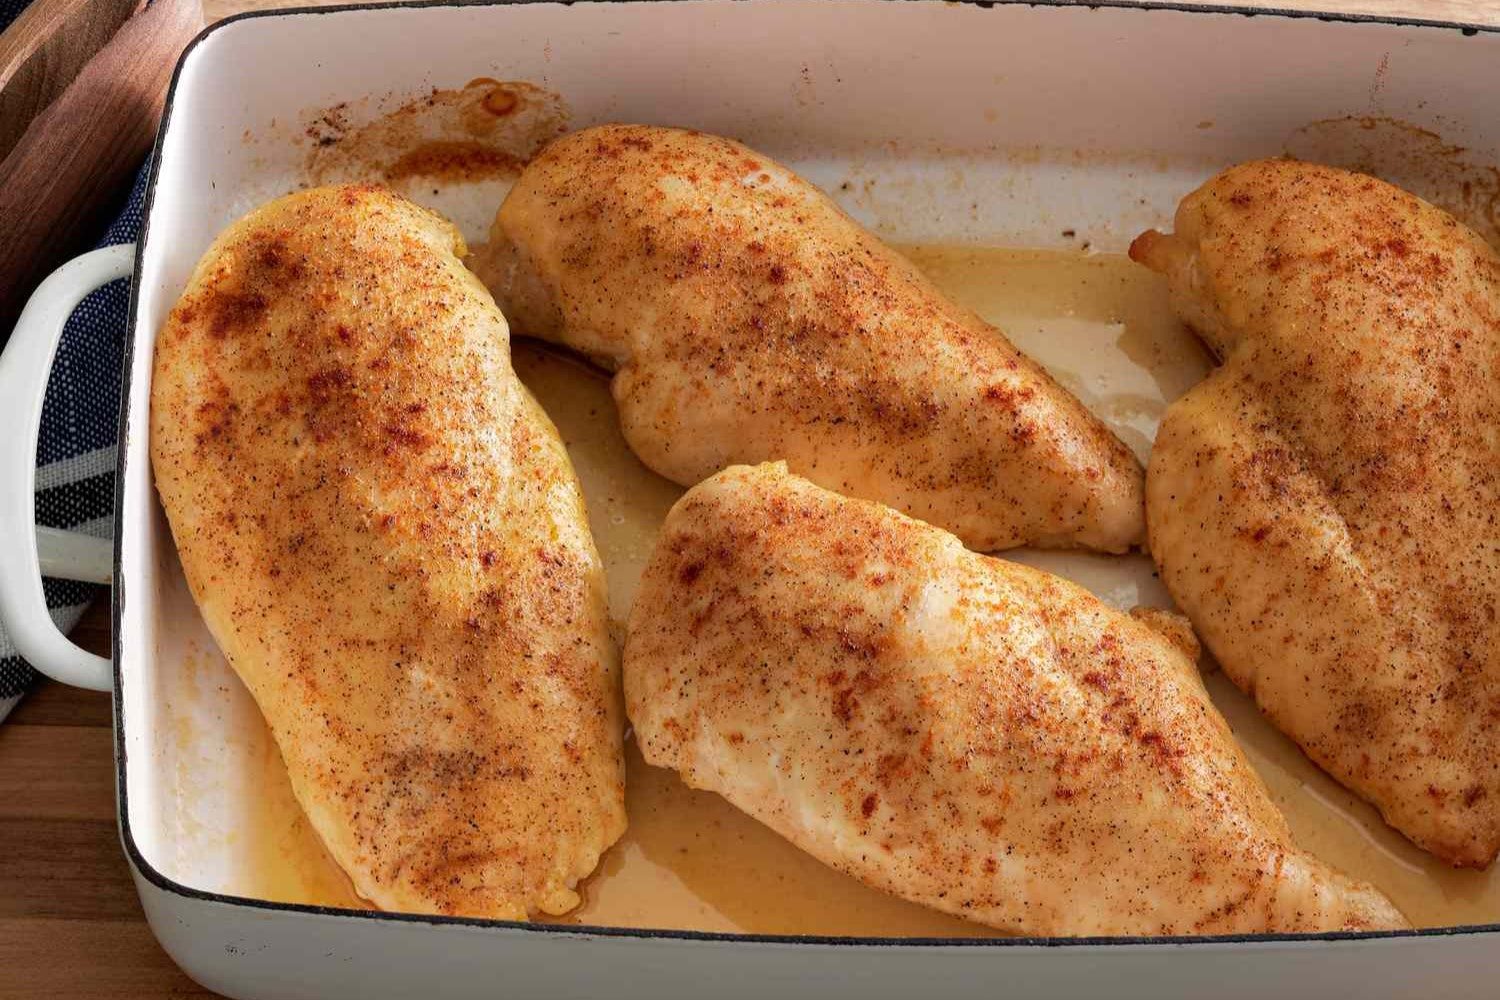 Discover The Perfect Baking Time For Boneless Chicken Breasts At 325!